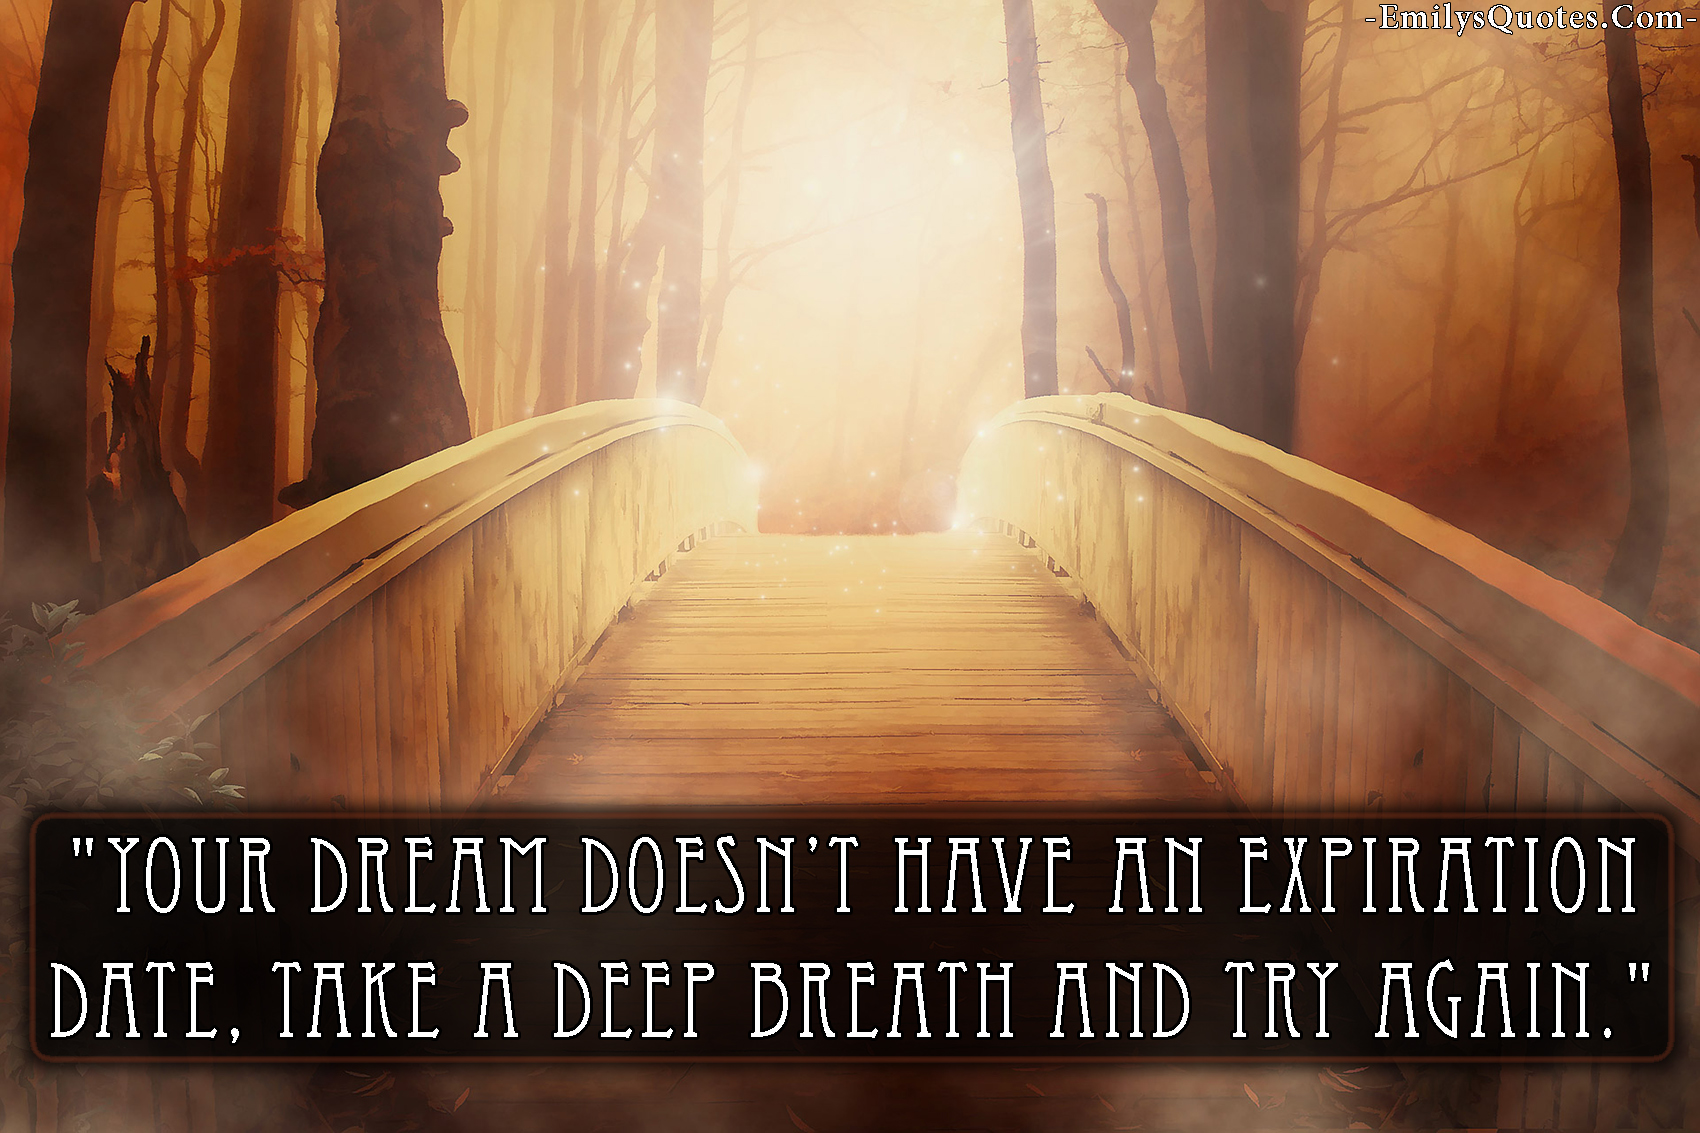 Your dream doesn’t have an expiration date, take a deep breath and try again